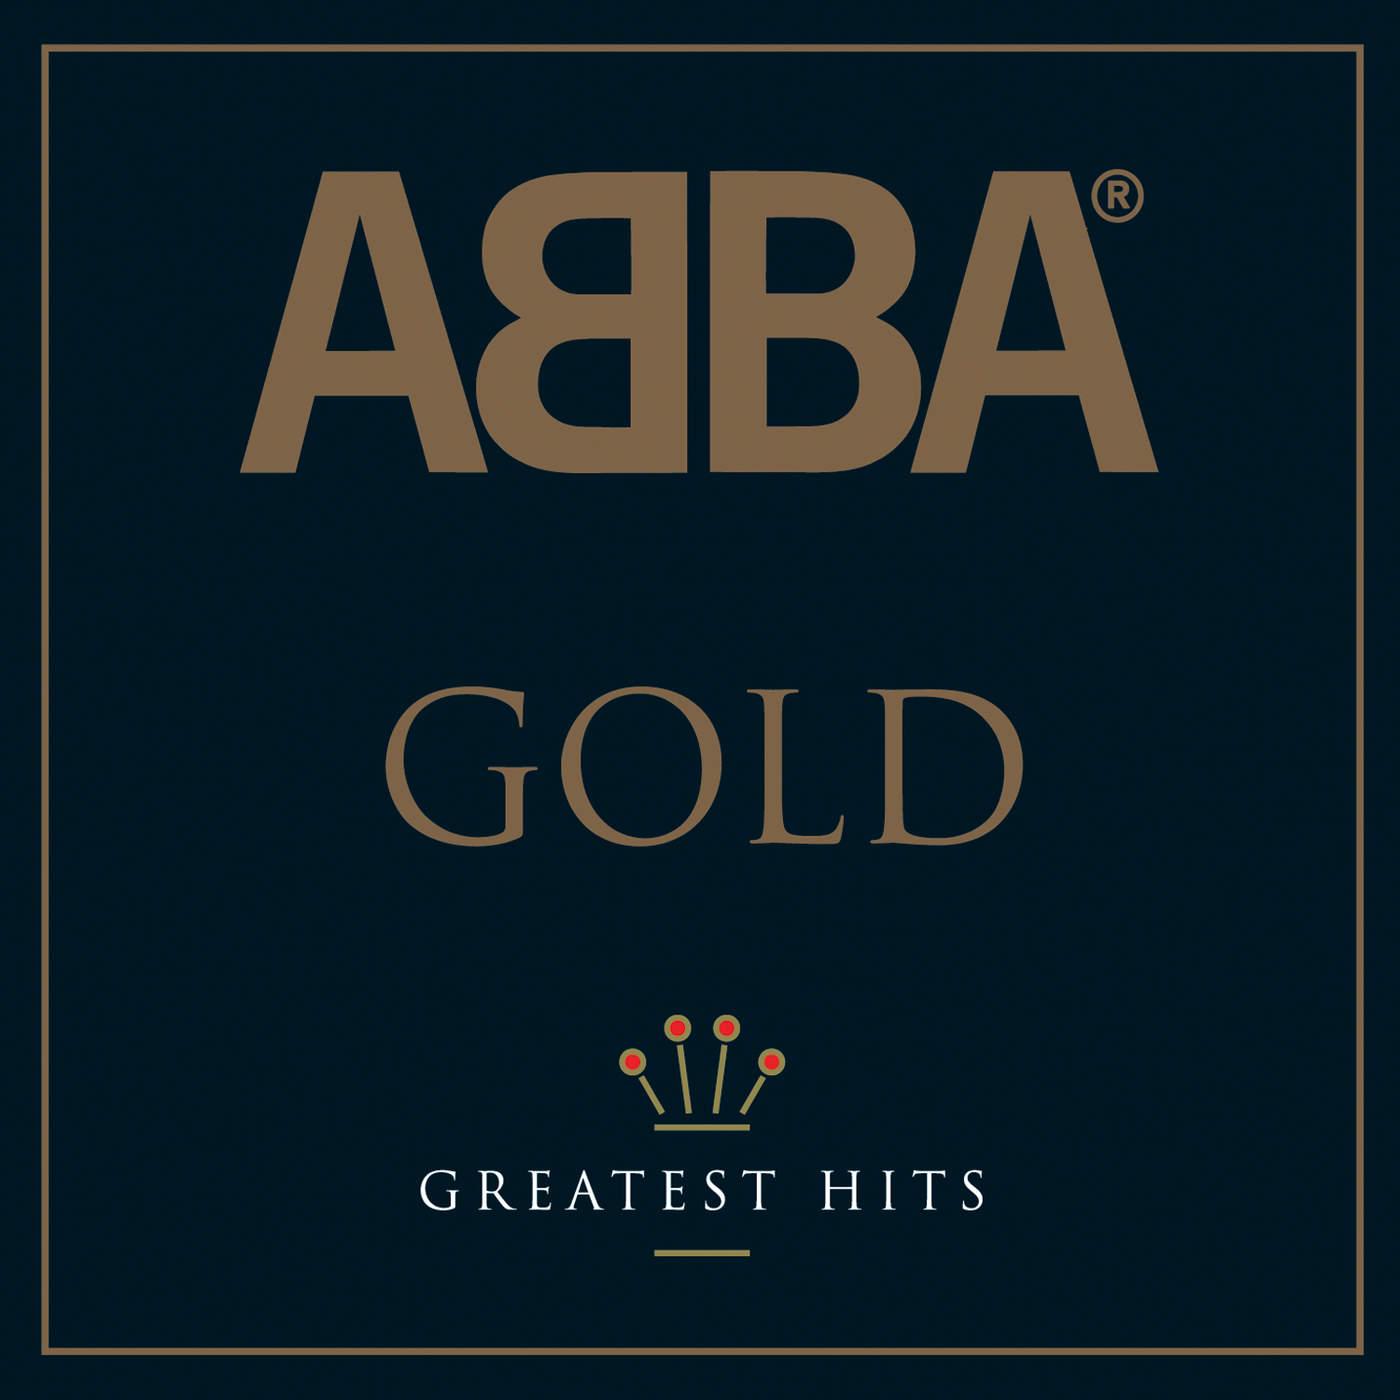 ABBA GOLD Trailers, Photo and Wallpaper